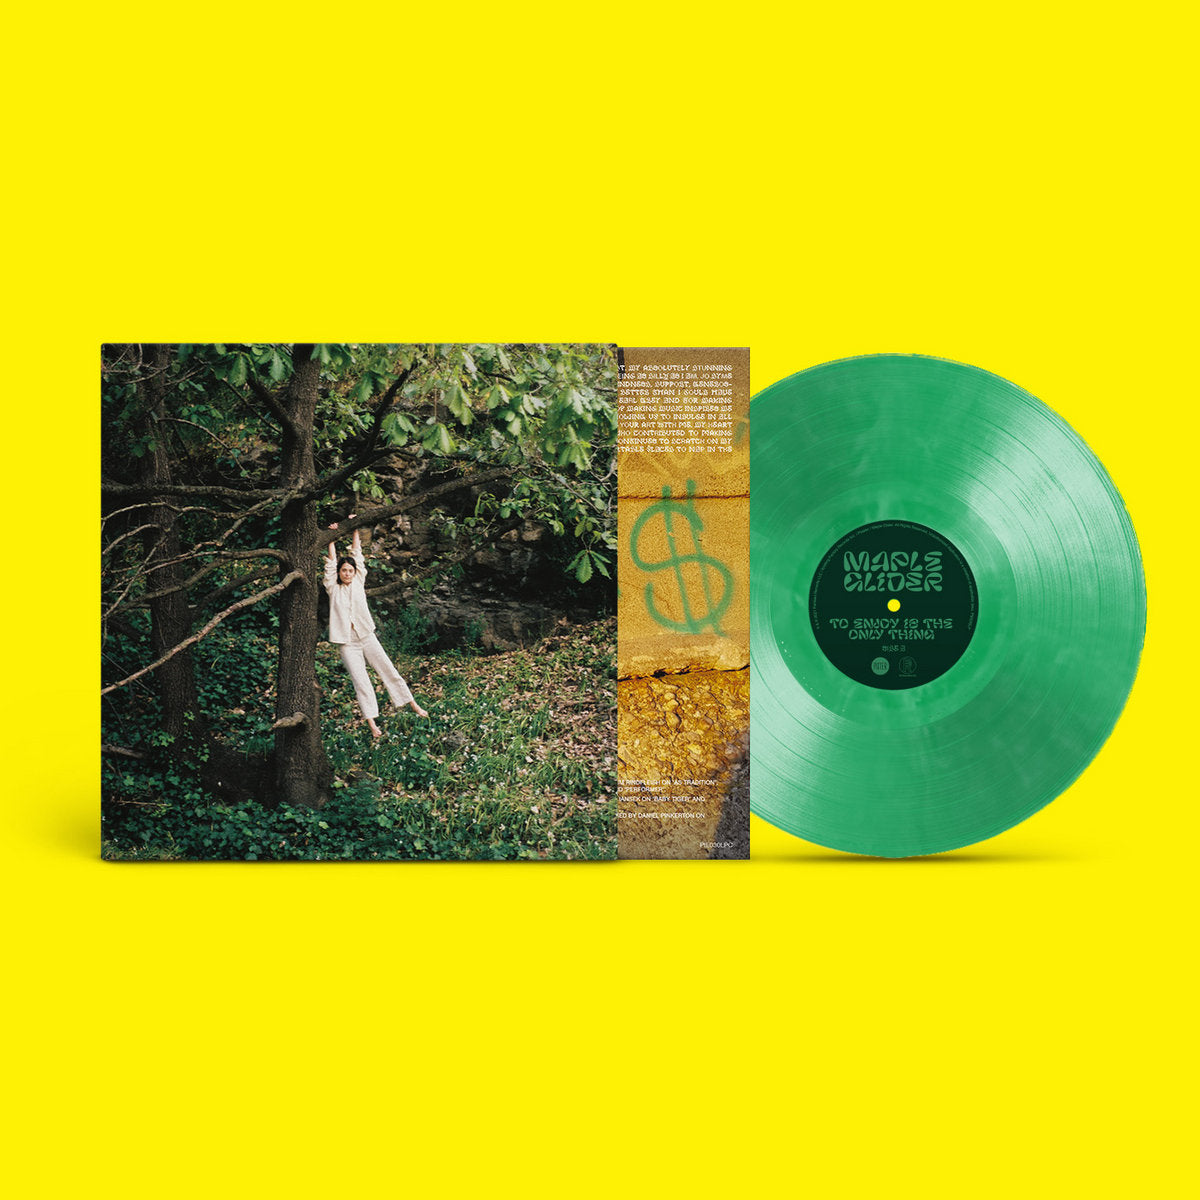 MAPLE GLIDER - To Enjoy Is The Only Thing - LP - Pearly Green Vinyl